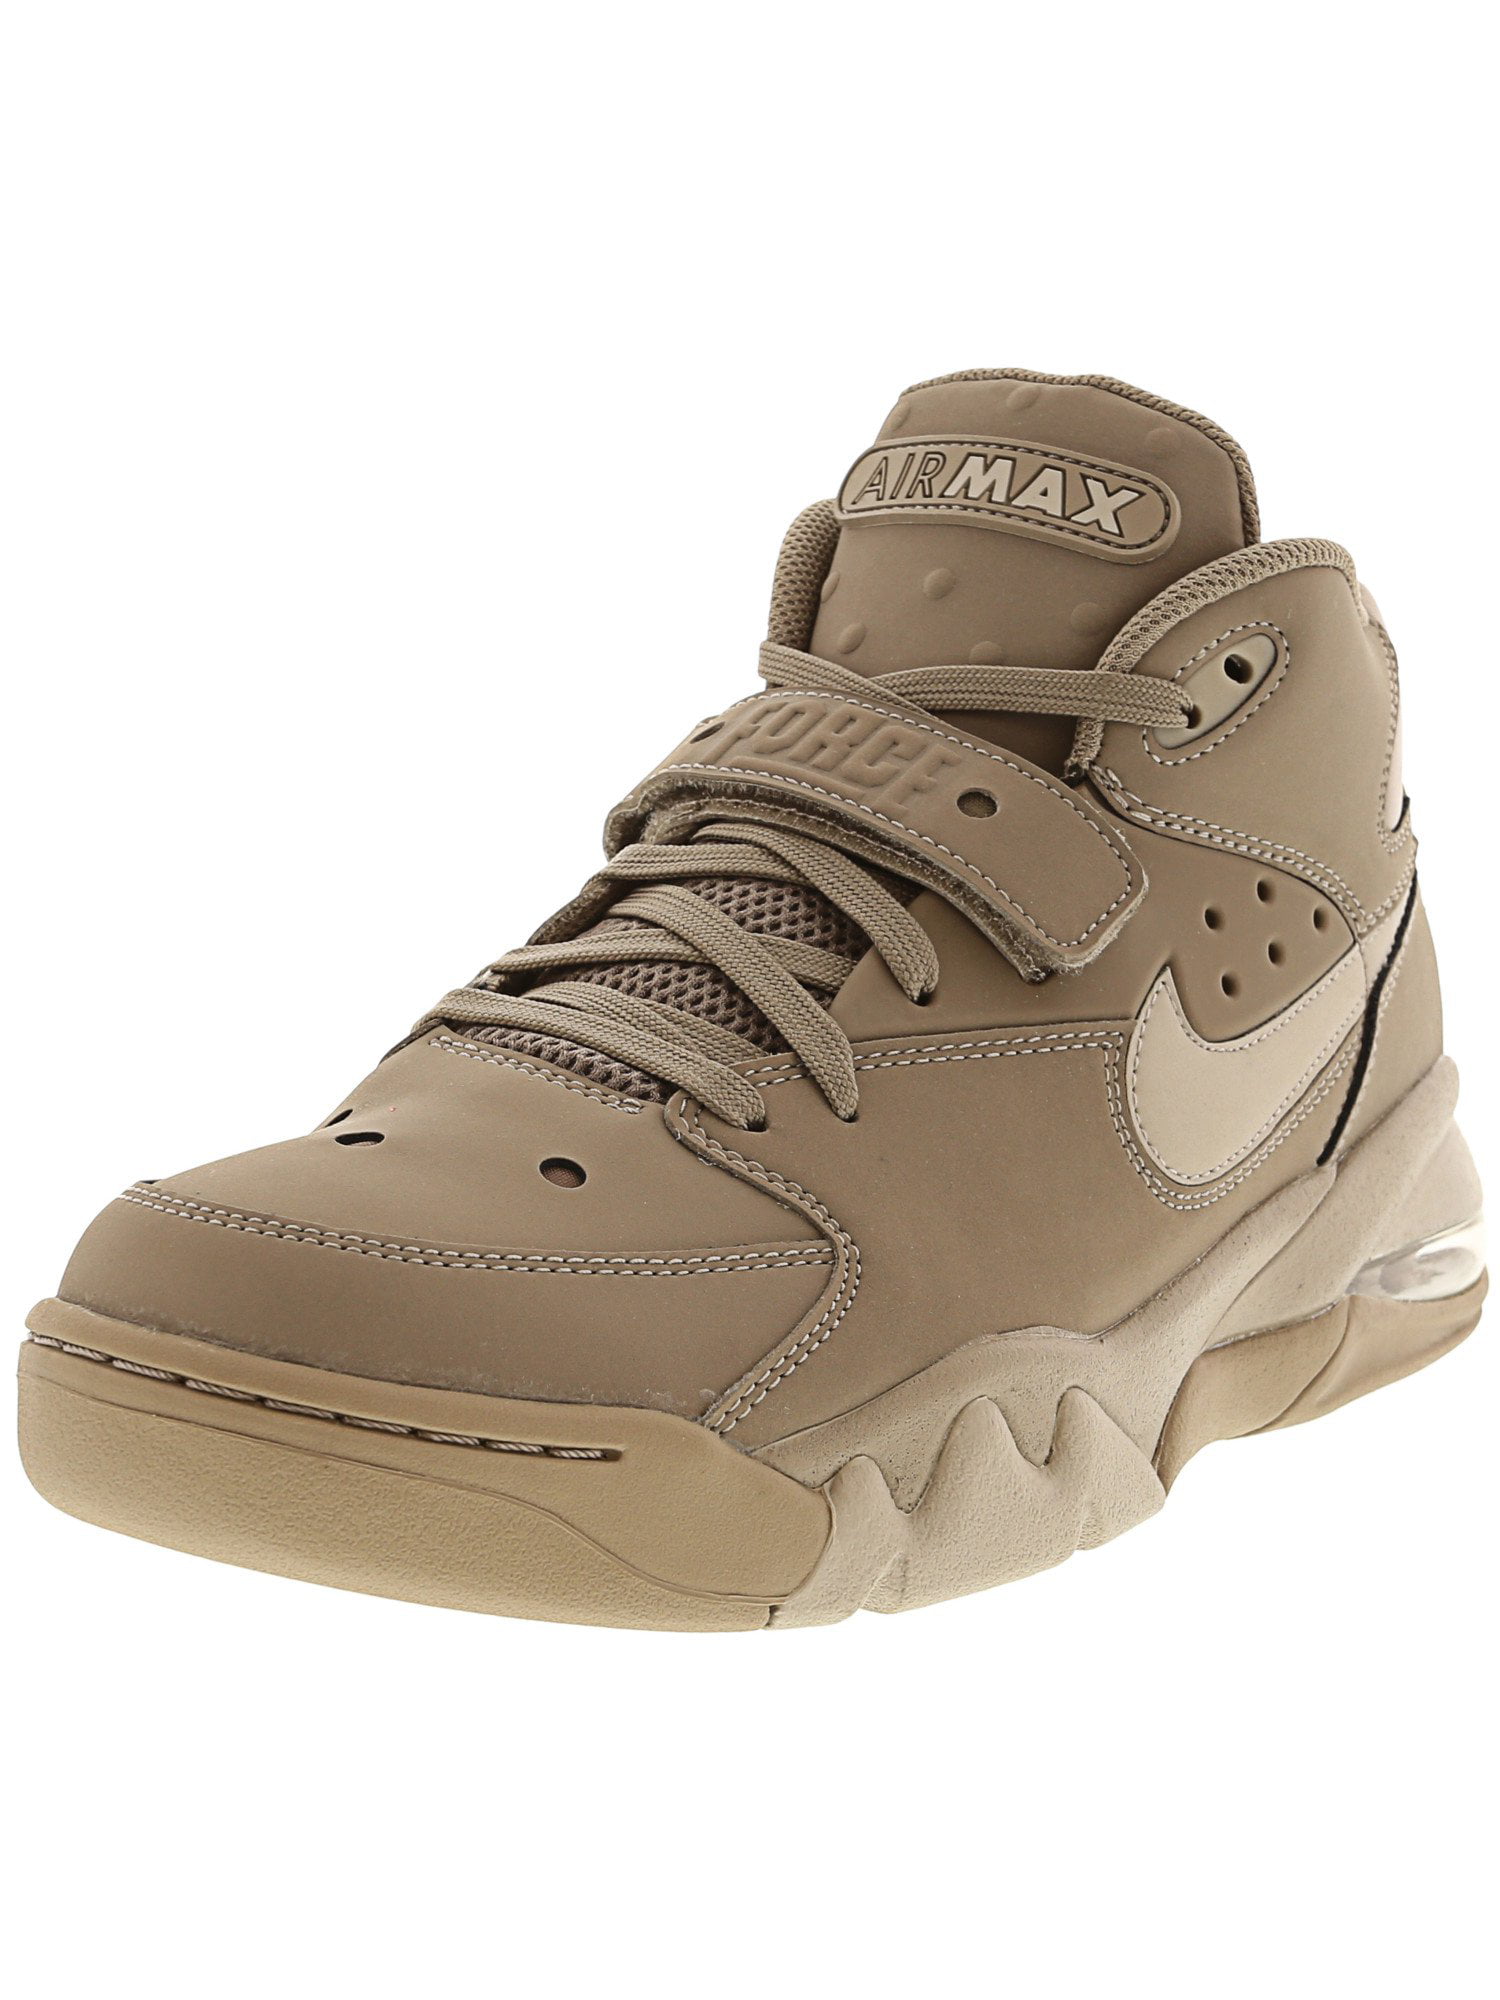 Nike - Nike Men's Air Force Max High-Top Leather Basketball Shoe - 10M